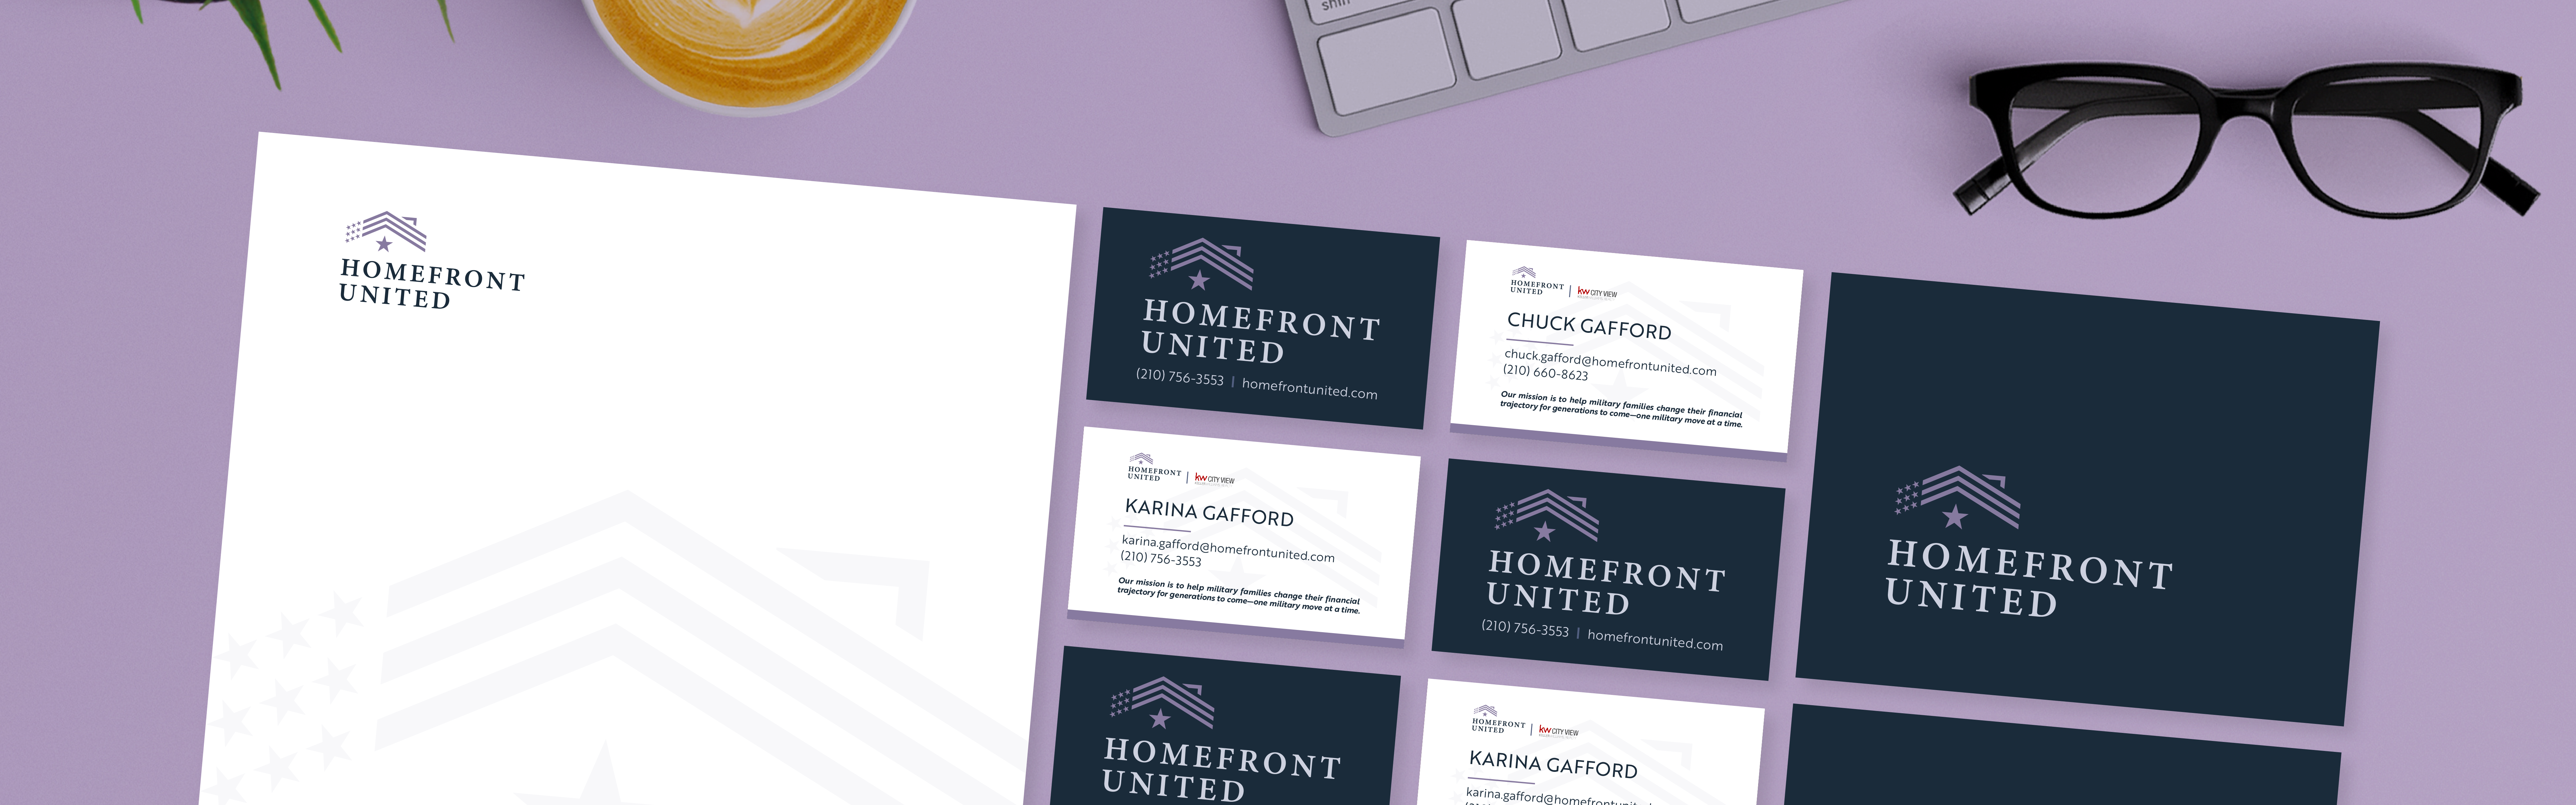 A selection of Homefront United branded stationery items including letterhead, business cards, and an envelope displayed on a purple background with a keyboard, a pair of glasses, and a cup of coffee suggesting